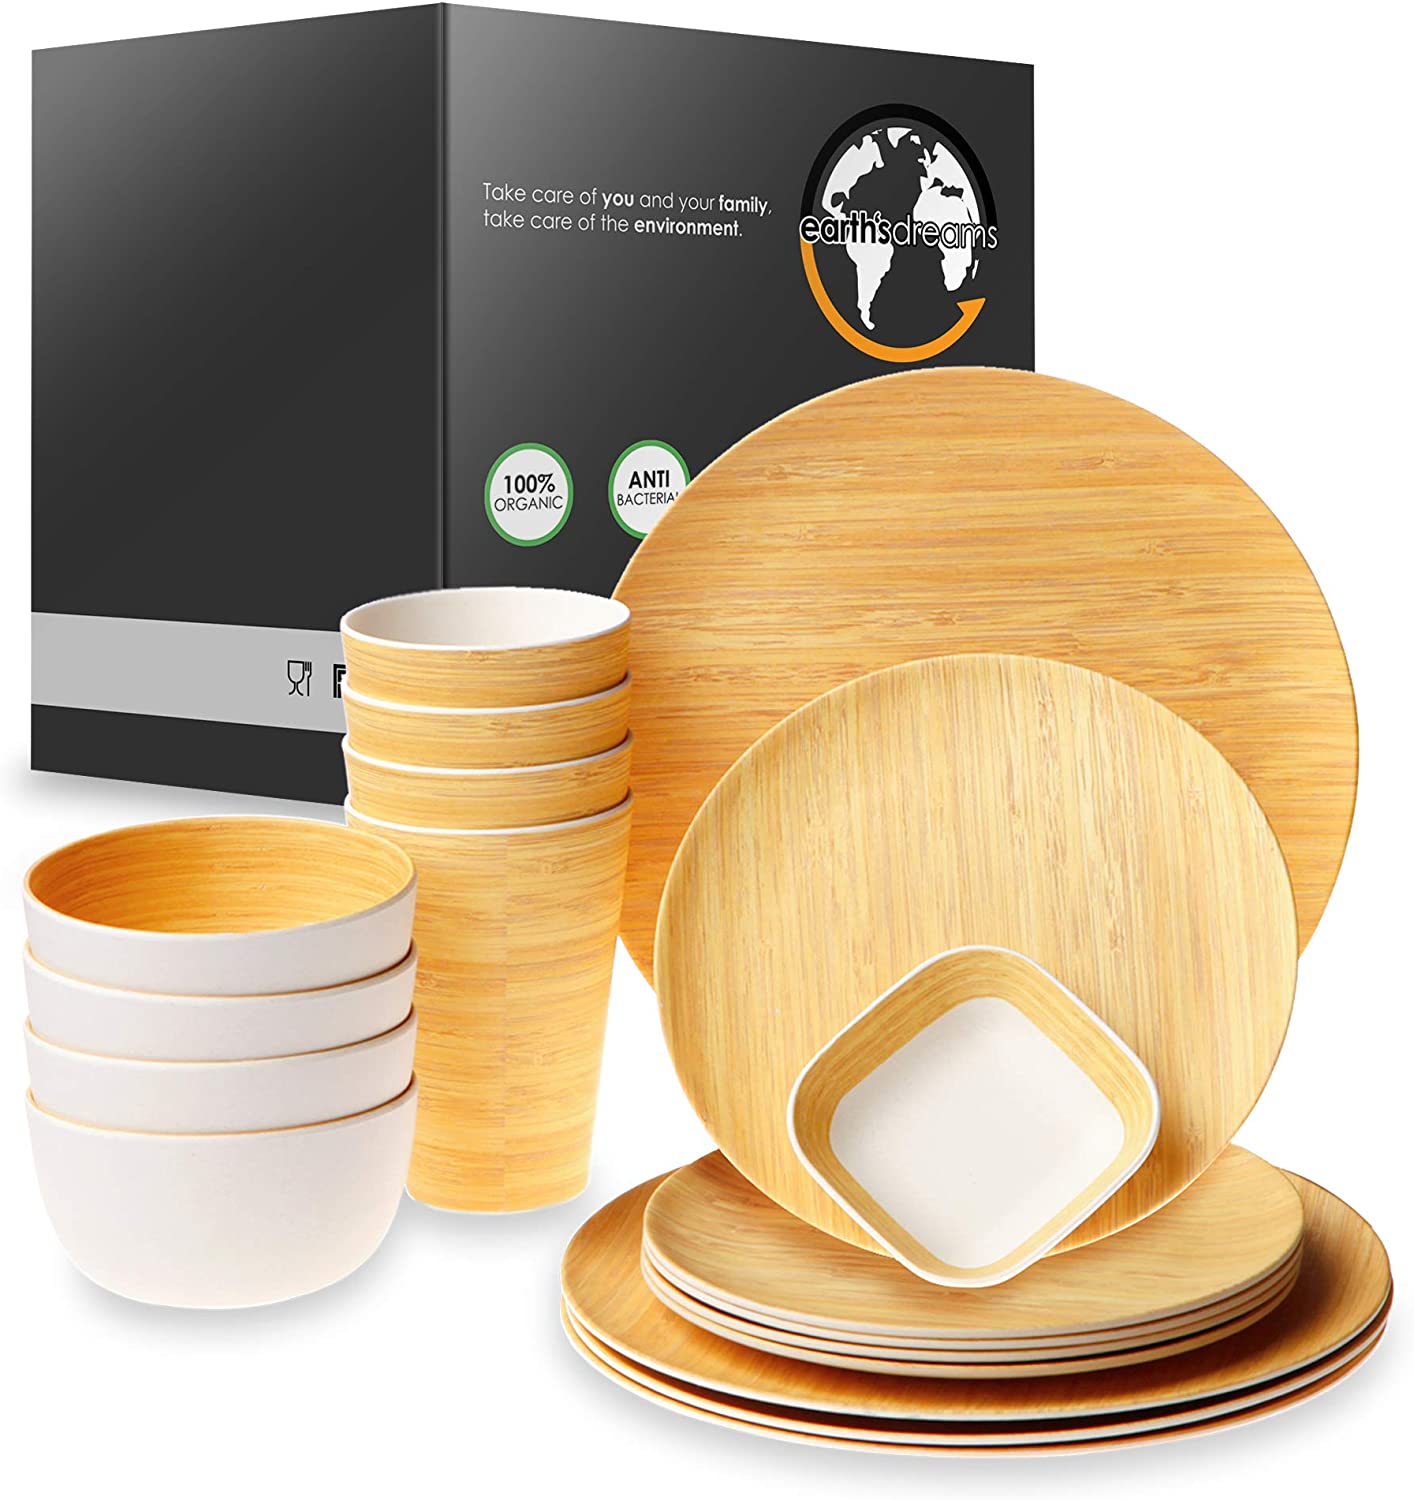 Reusable Bamboo Dinnerware Set for 4 Guests (17 Pieces)